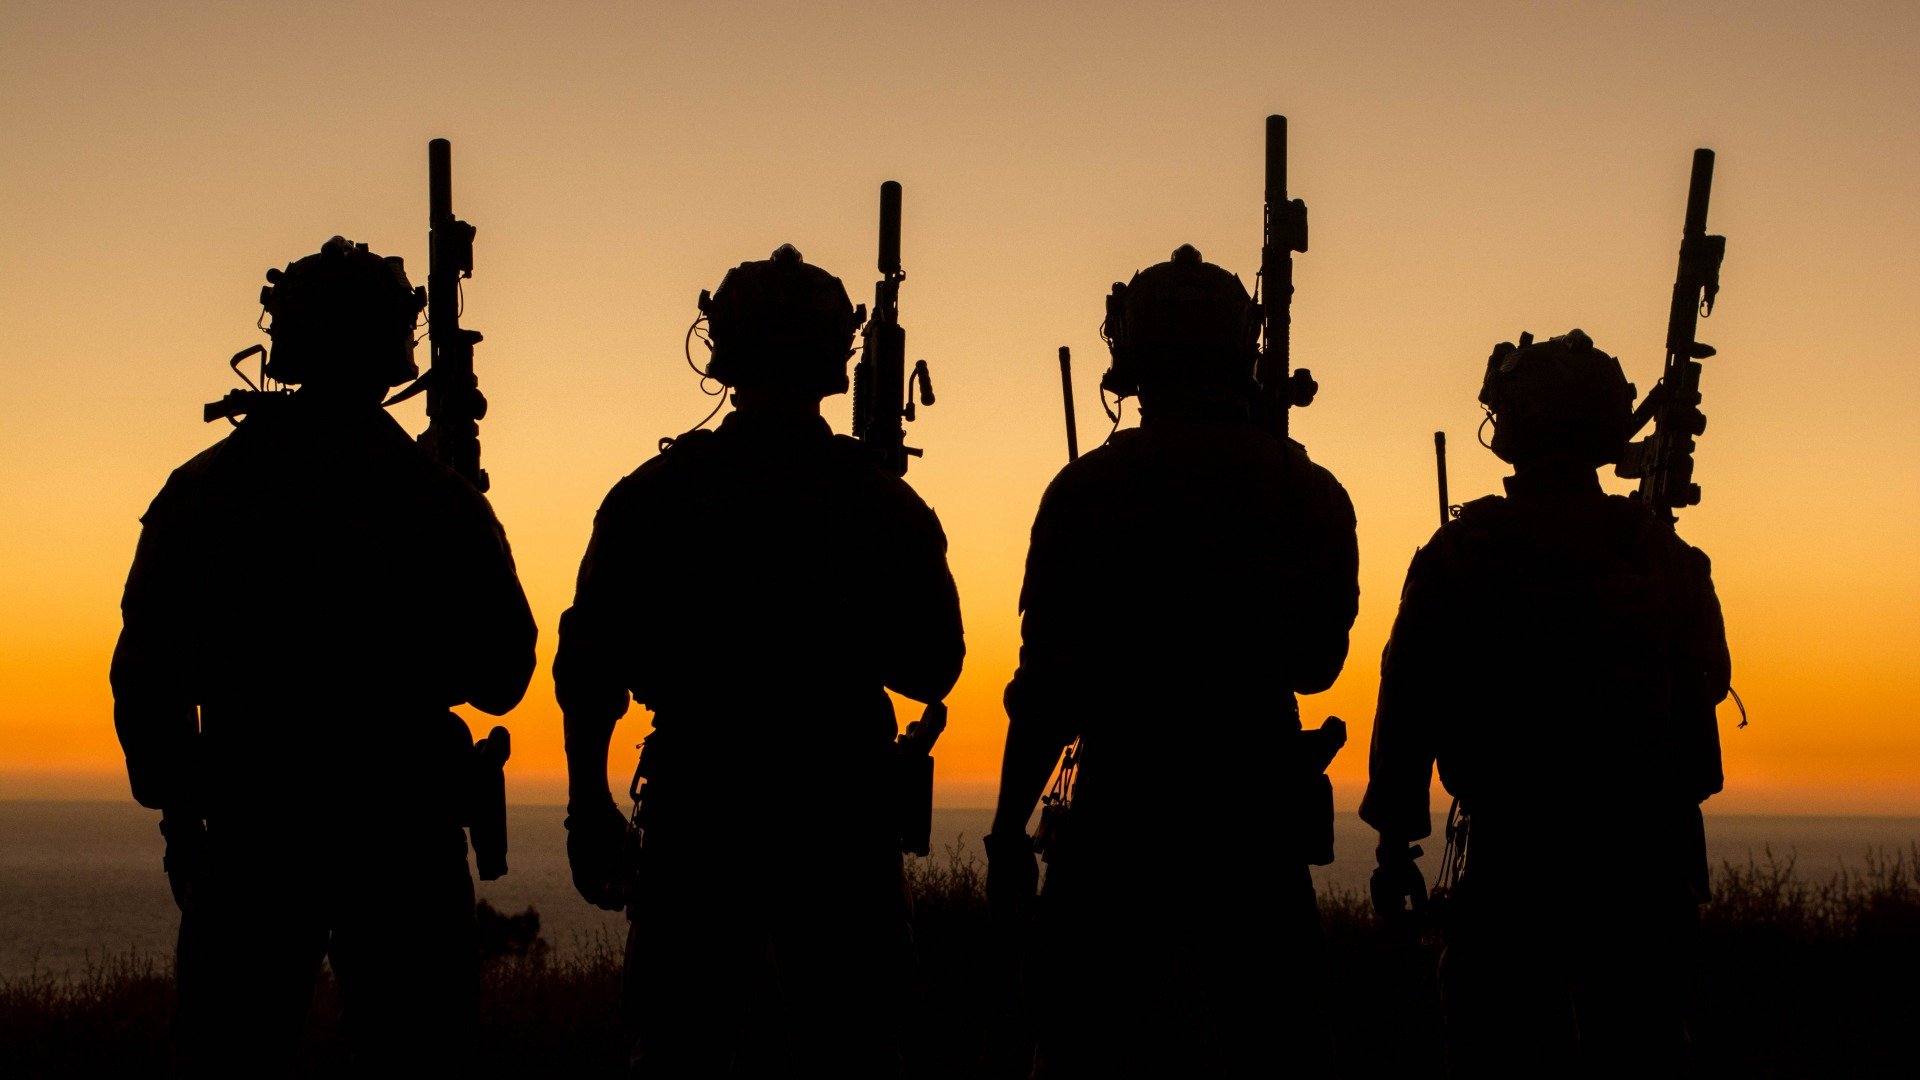 Soldiers Watching the Sunset HD Wallpaper